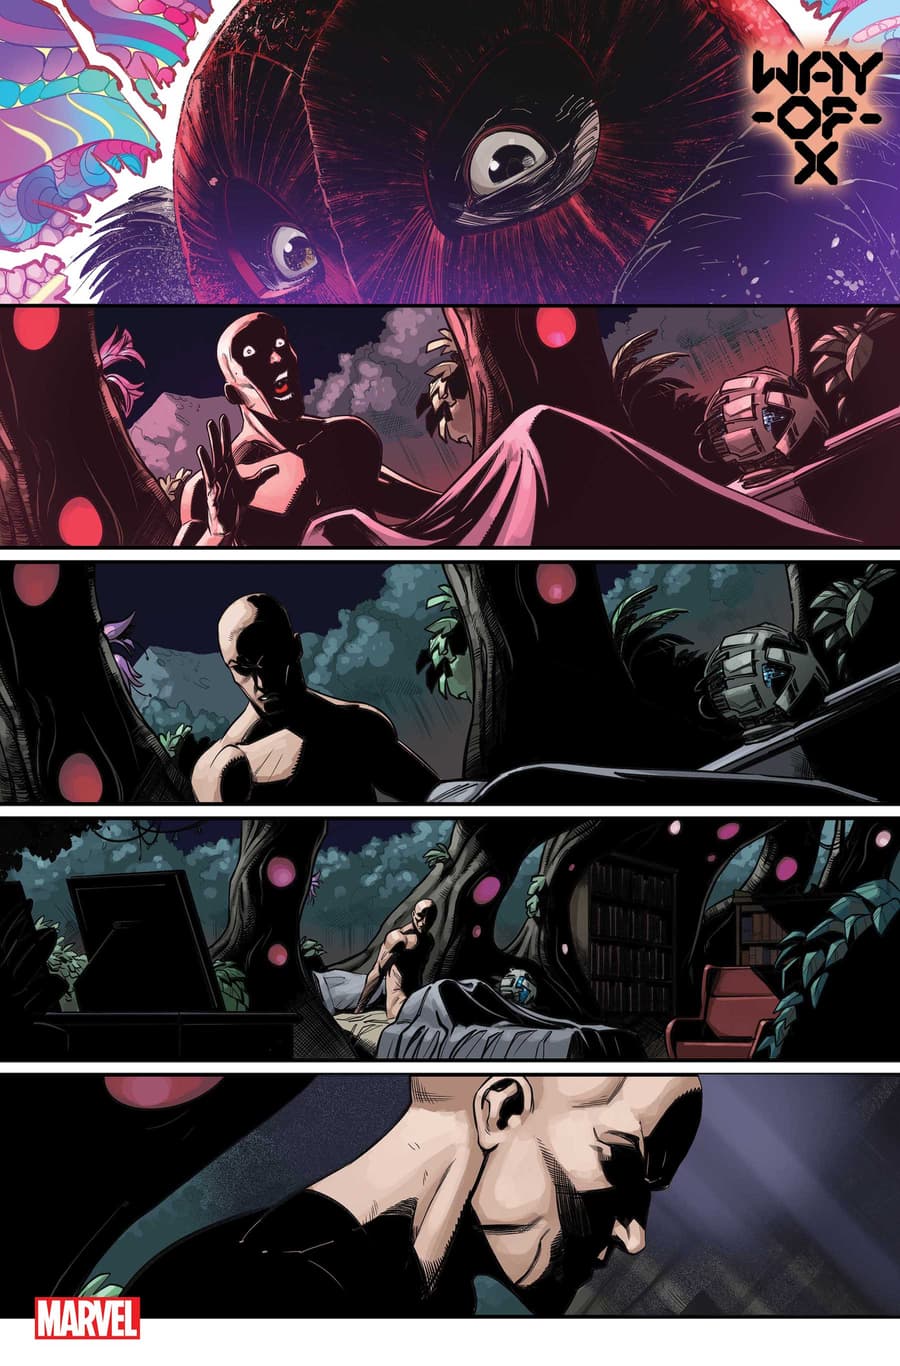 WAY OF X #1 preview interiors by Bob Quinn with colors by Java Tartaglia